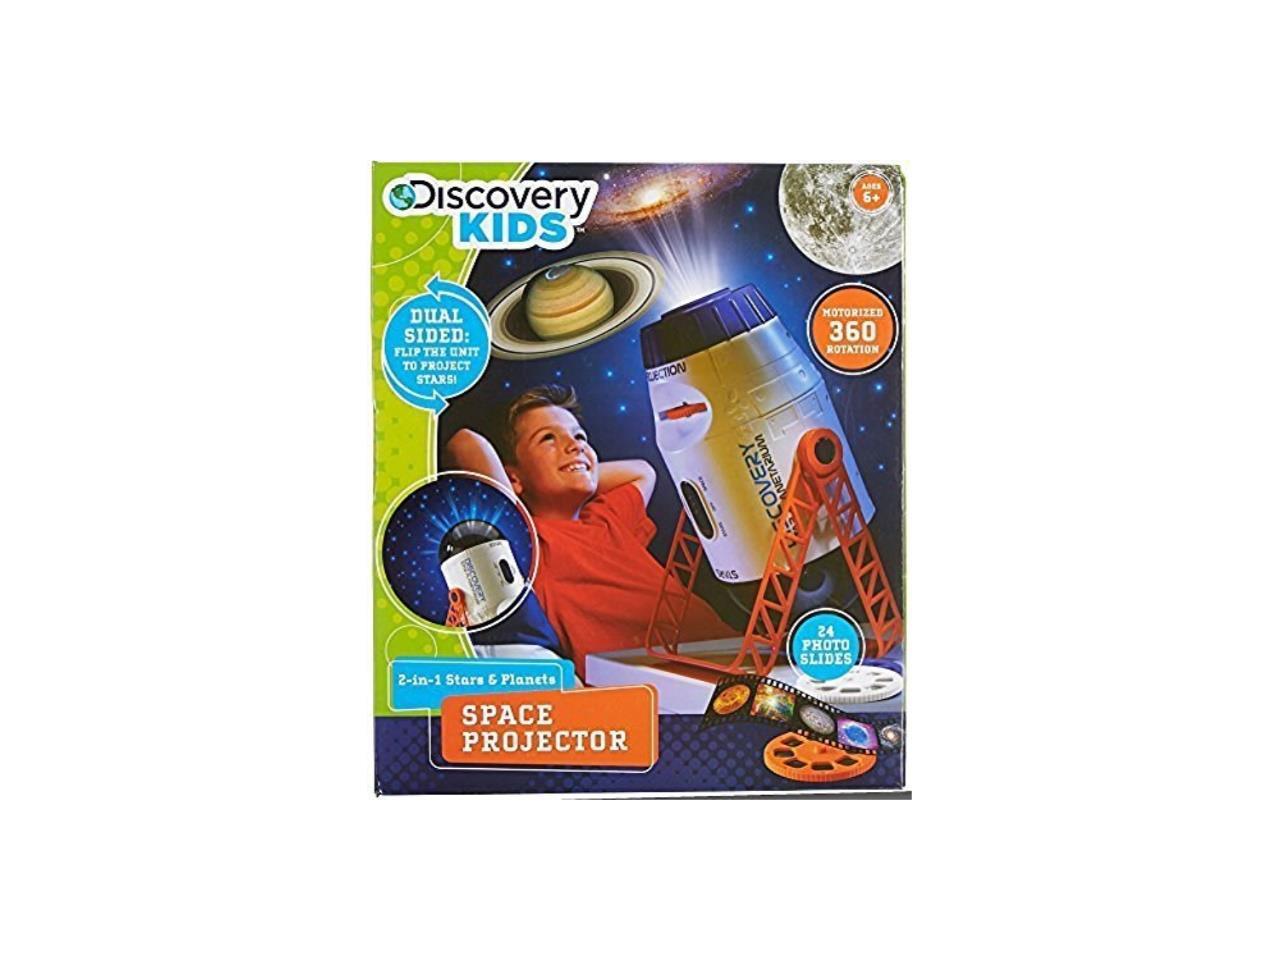 Explore 360 24 Incredible 2-In-1 Stars Planet Space Projector By Discovery Kids 